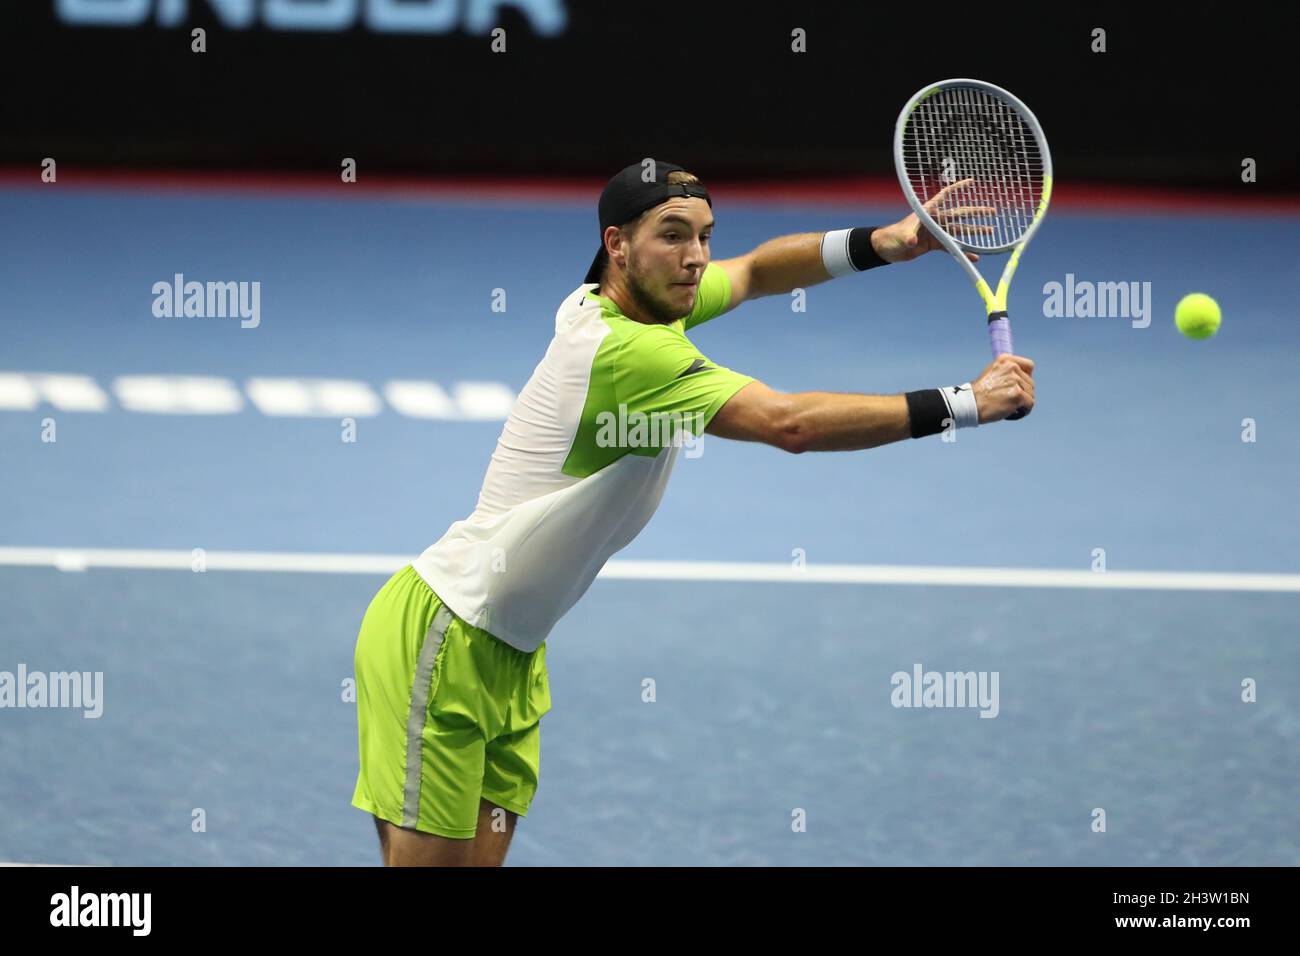 St. Petersburg, Russia. 30th Oct, 2021. Jan-Lennard Struff of Germany seen  in action during a match against Taylor Fritz of USA at the St. Petersburg  Open, 2021 tennis tournament at Sibur Arena.(Final